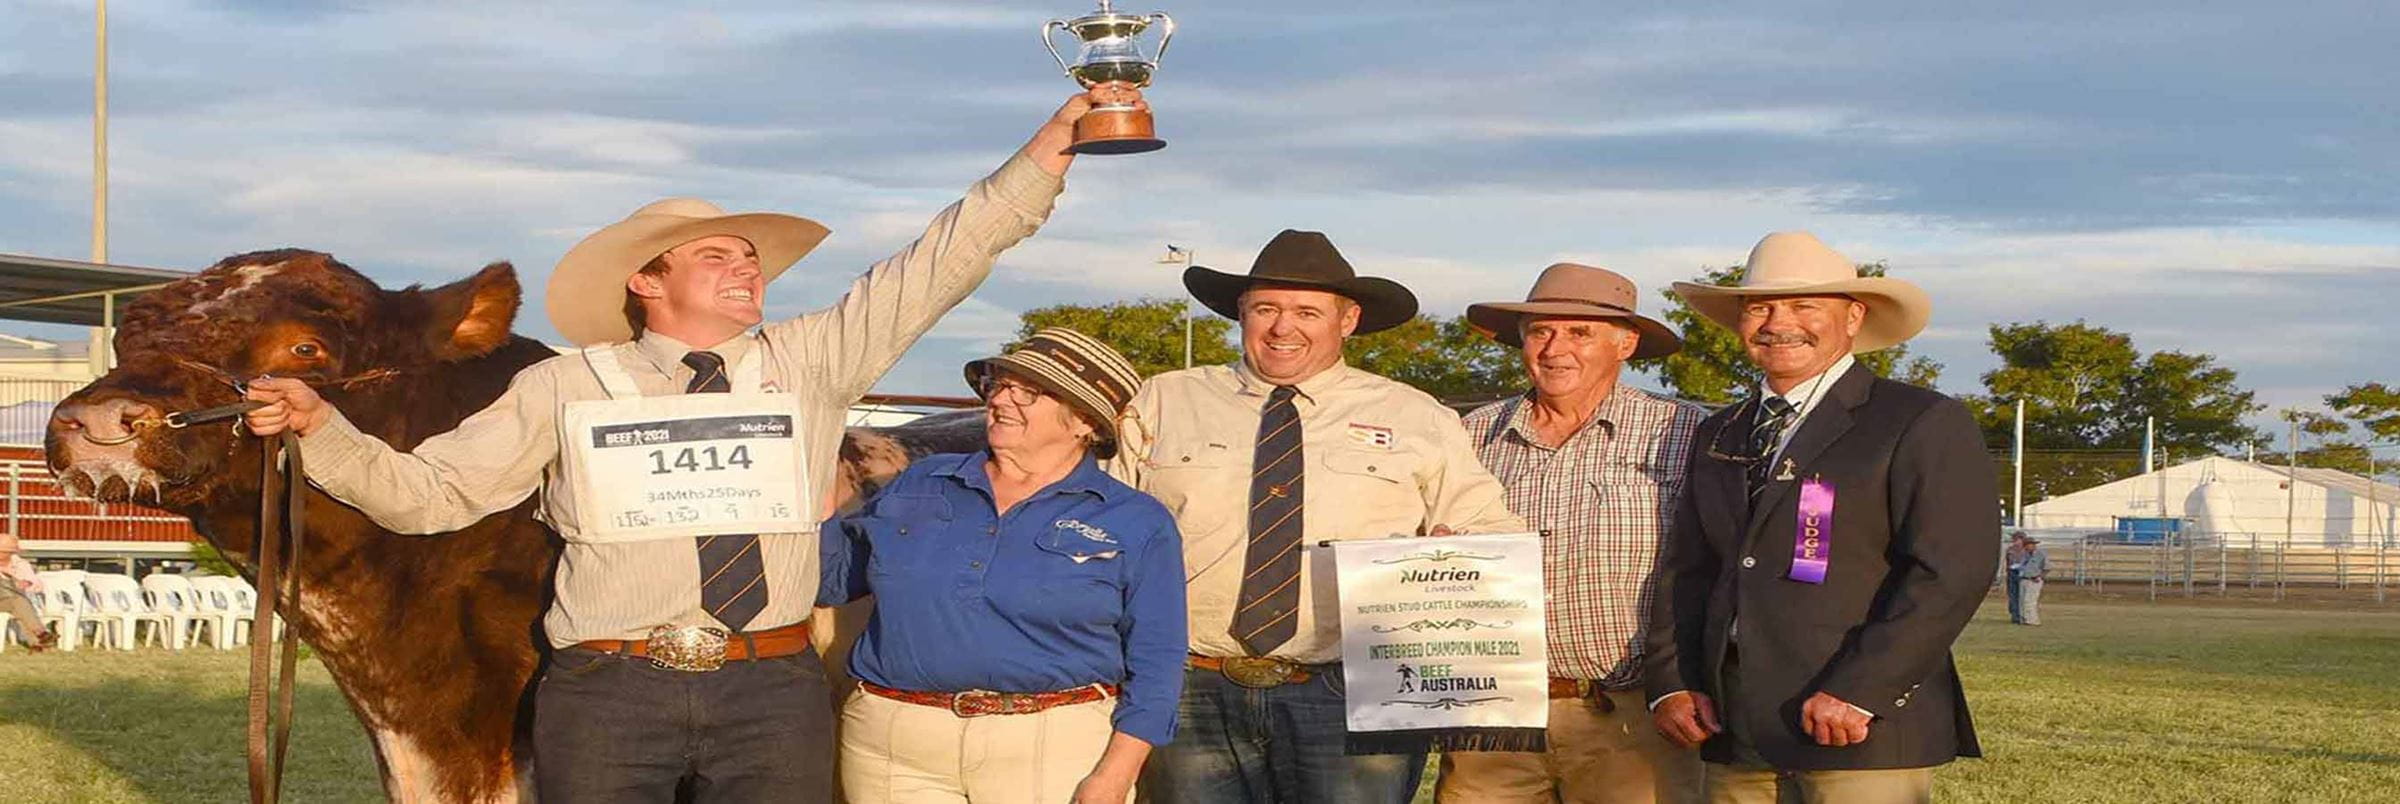 A group of people wearing cowboy hats with a cow and one person lifting  a trophy